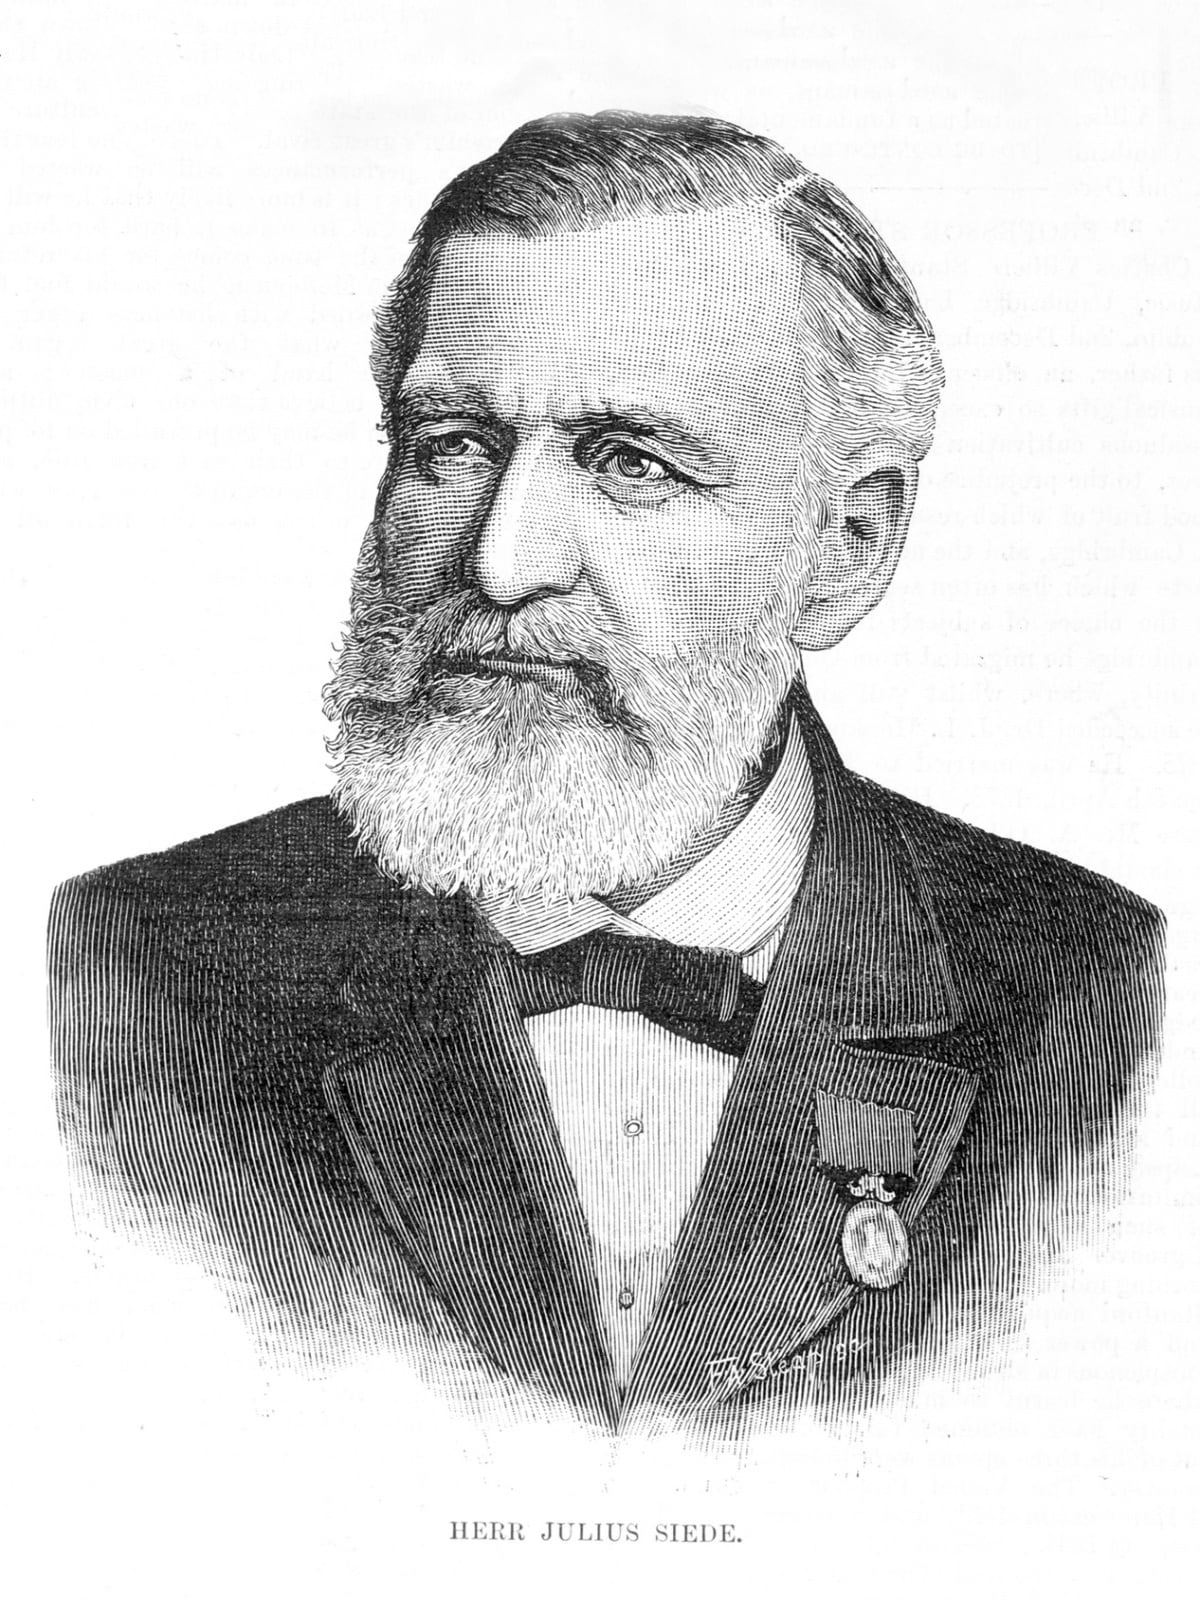 Julius Siede, 1890 (engraving by F. A. Sleap); State Library of Victoria